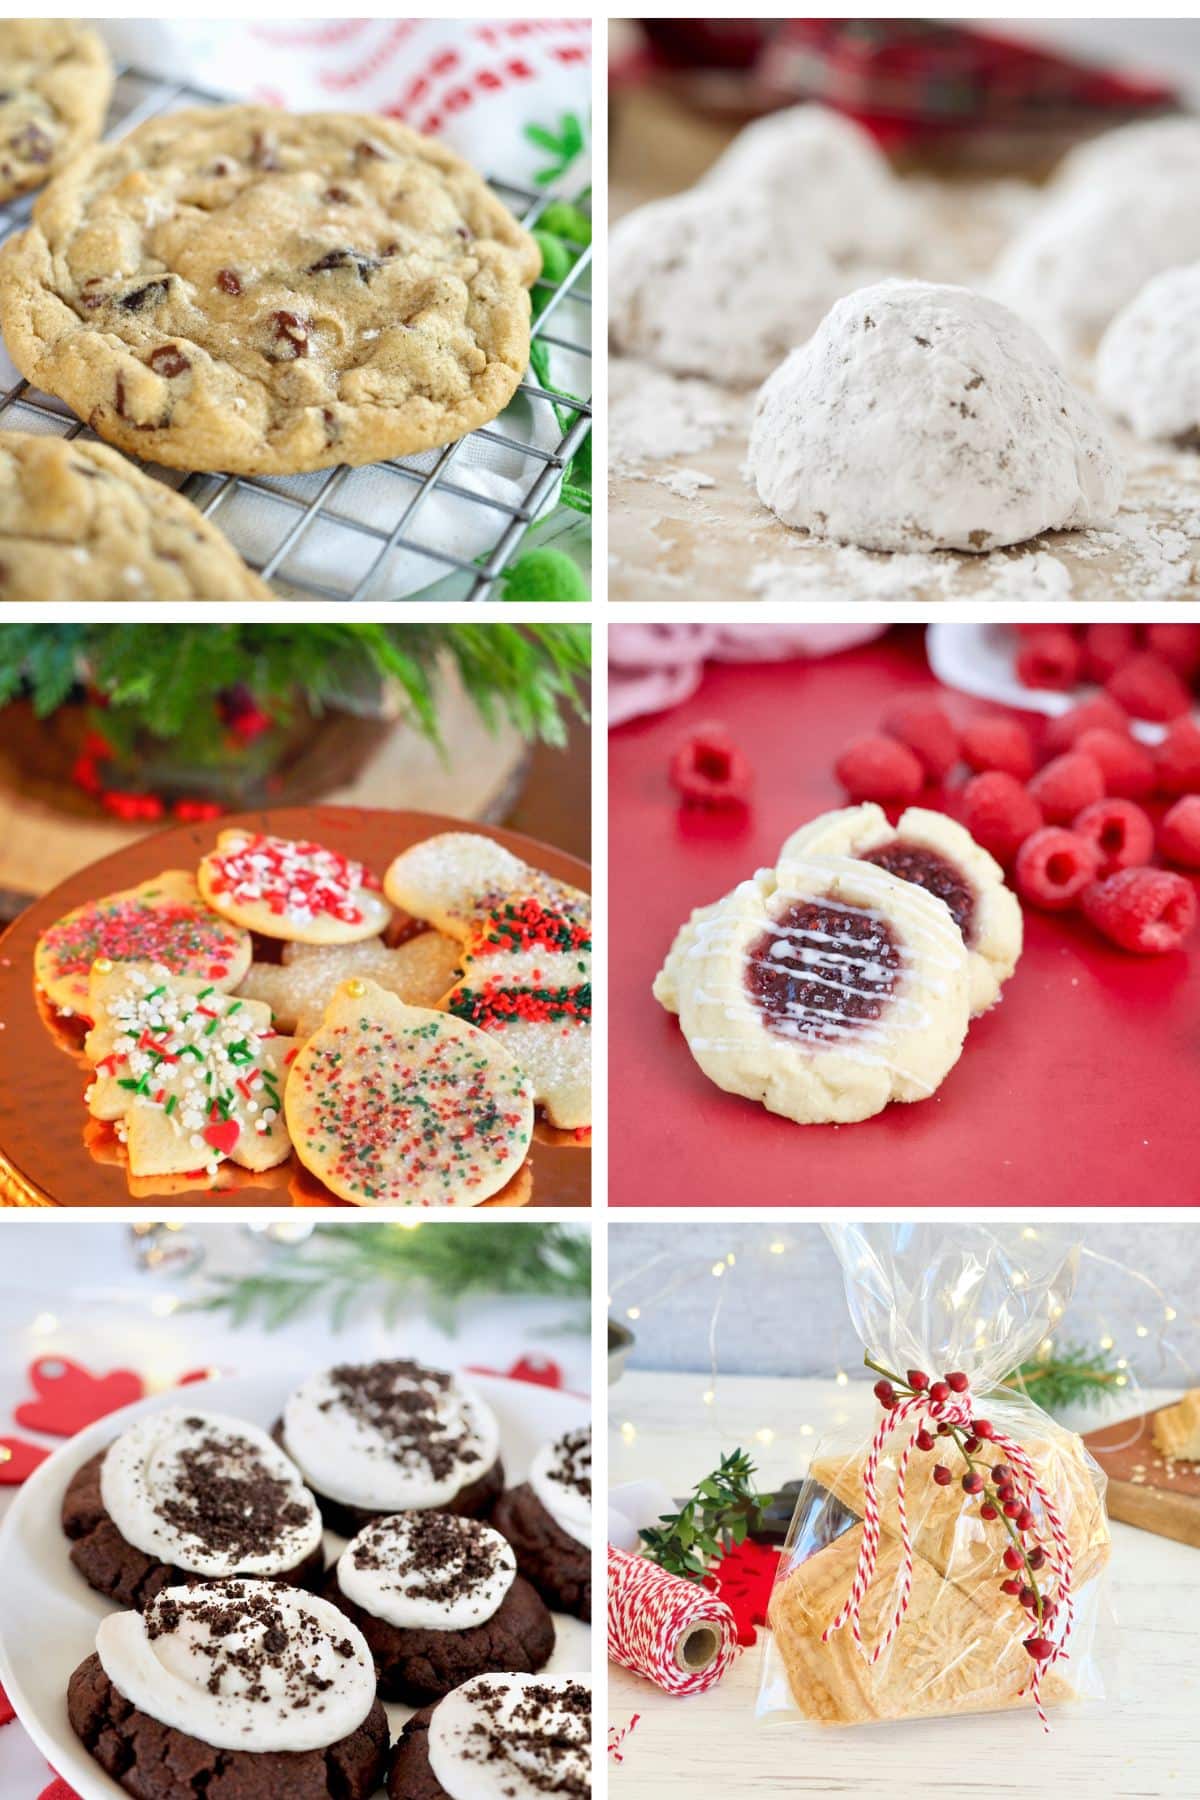 Favorite Christmas Cookies, Chewy Chocolate Chip, Pfeffernusse, cut out cookies, Raspberry thumbprints, Oreo Crumbl and Christmas shortbread.